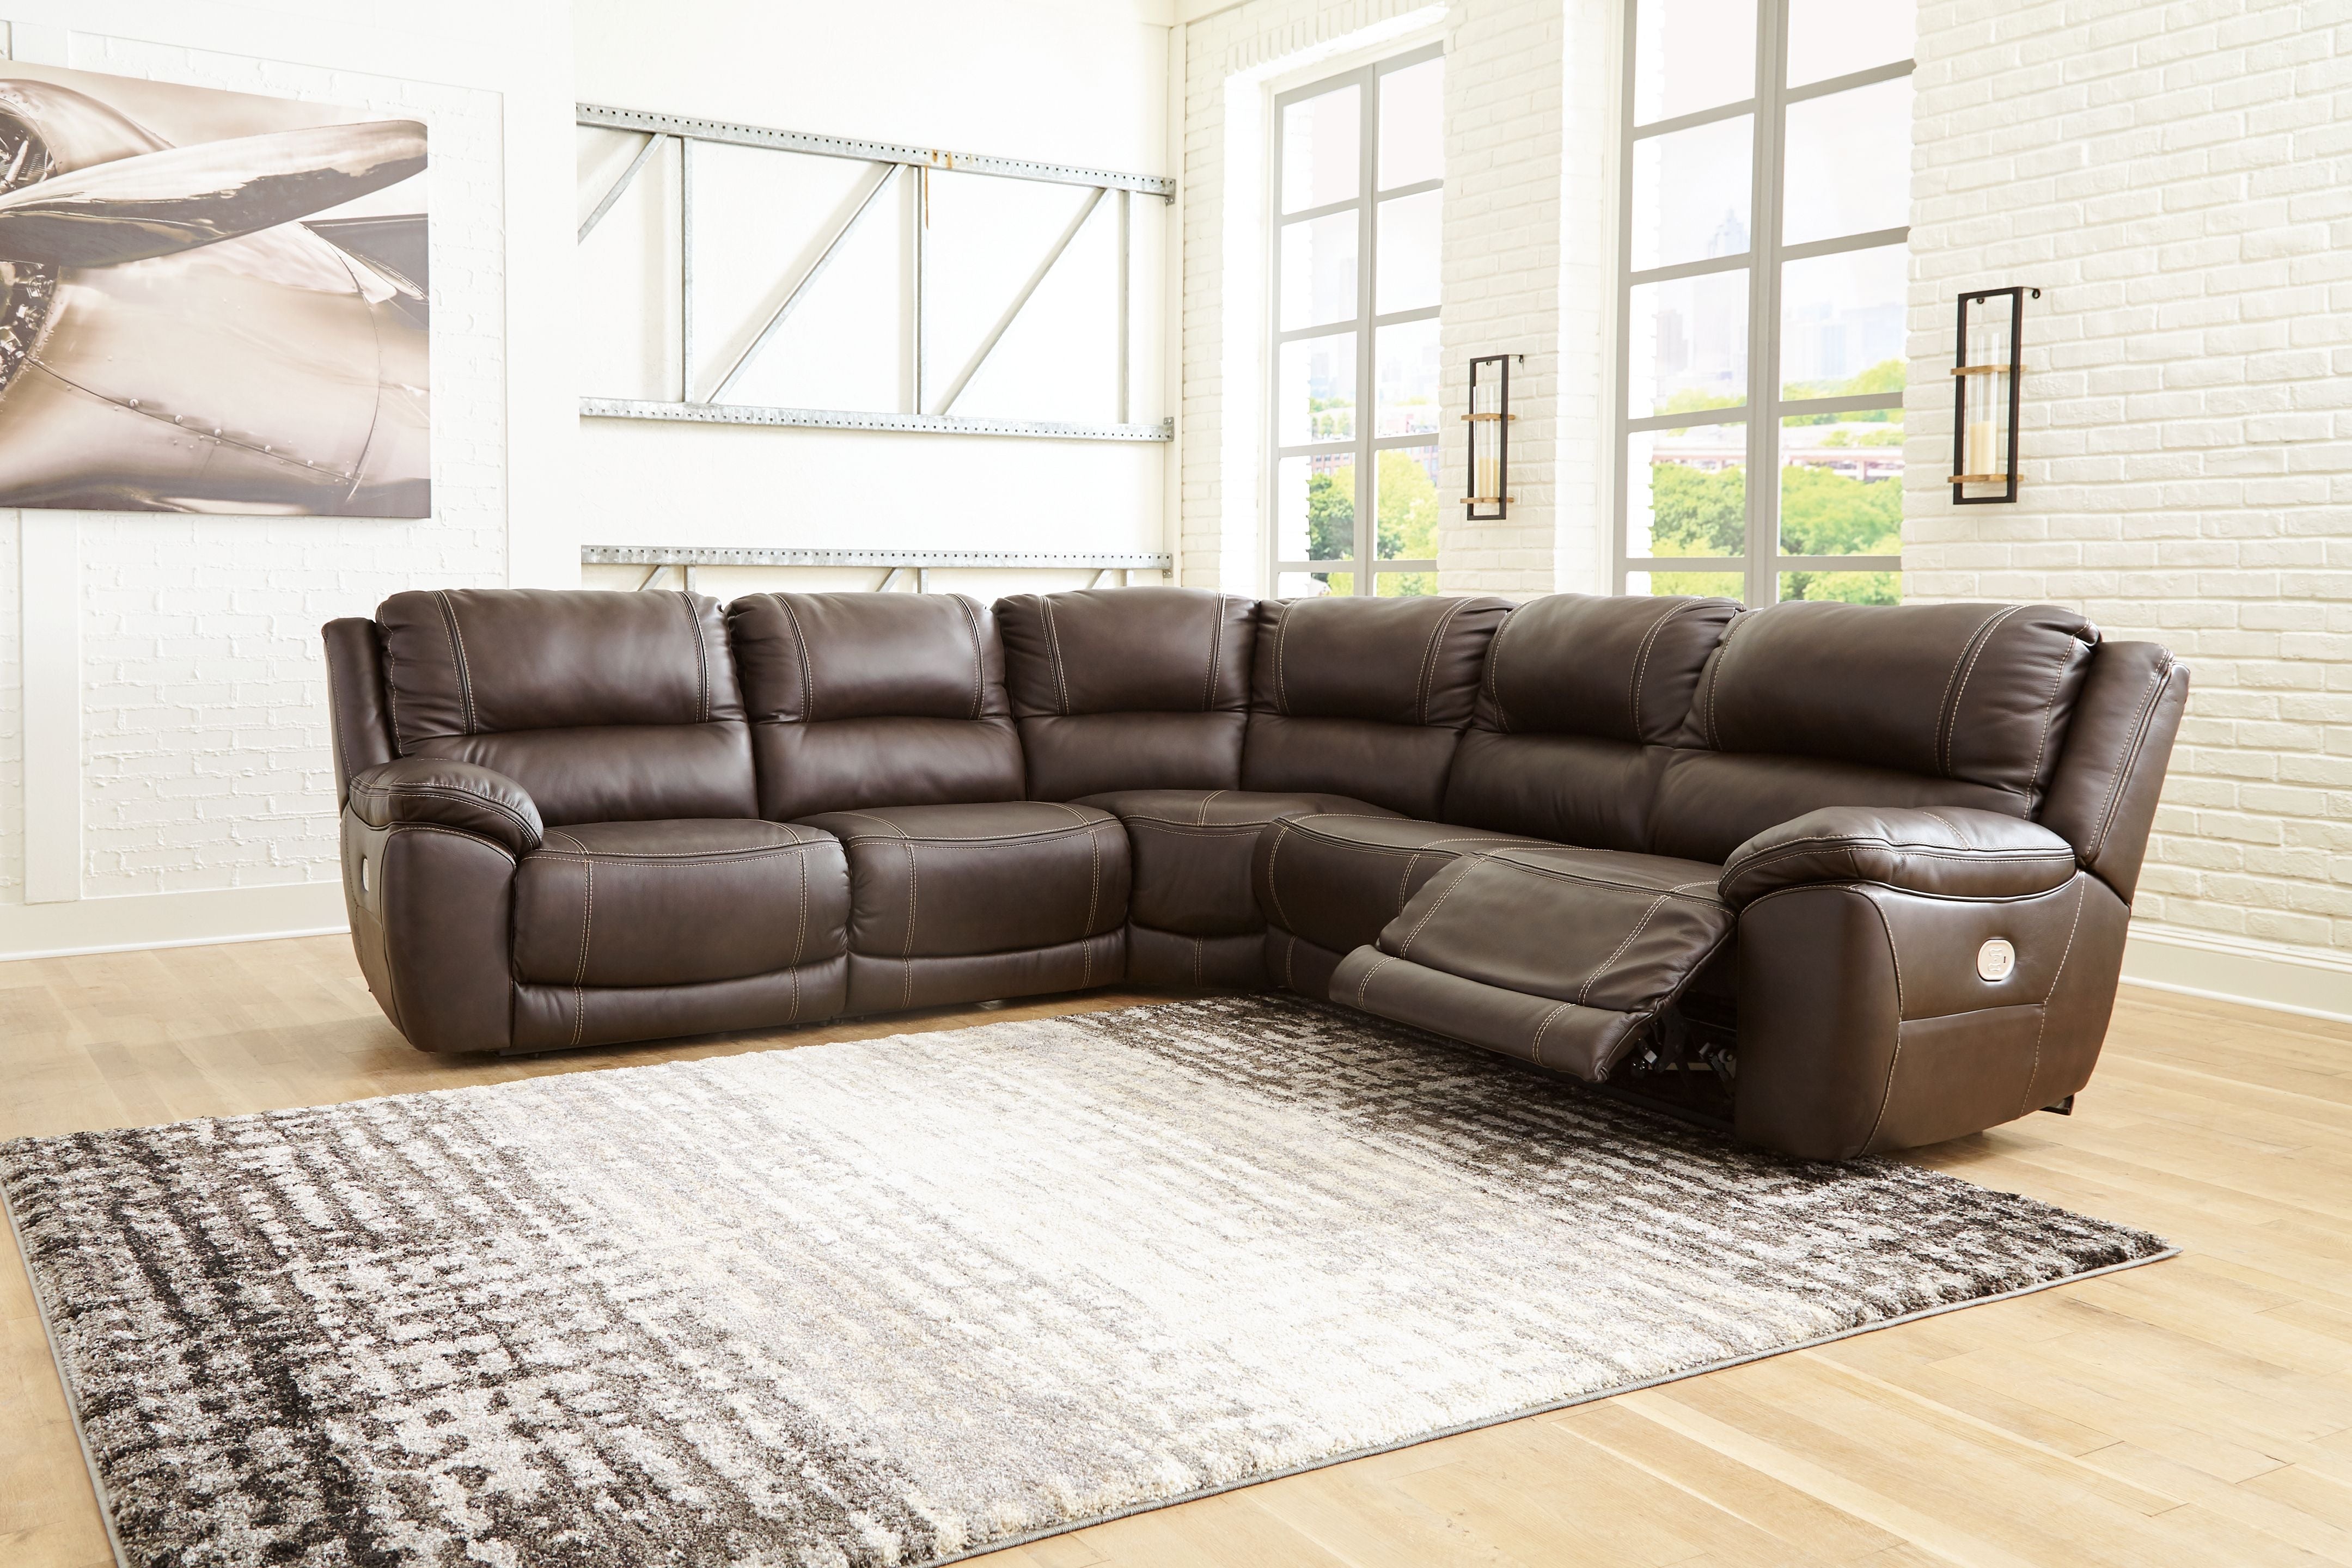 Dunleith - Chocolate - 5-Piece Power Reclining Sectional-Reclining Sectionals-American Furniture Outlet